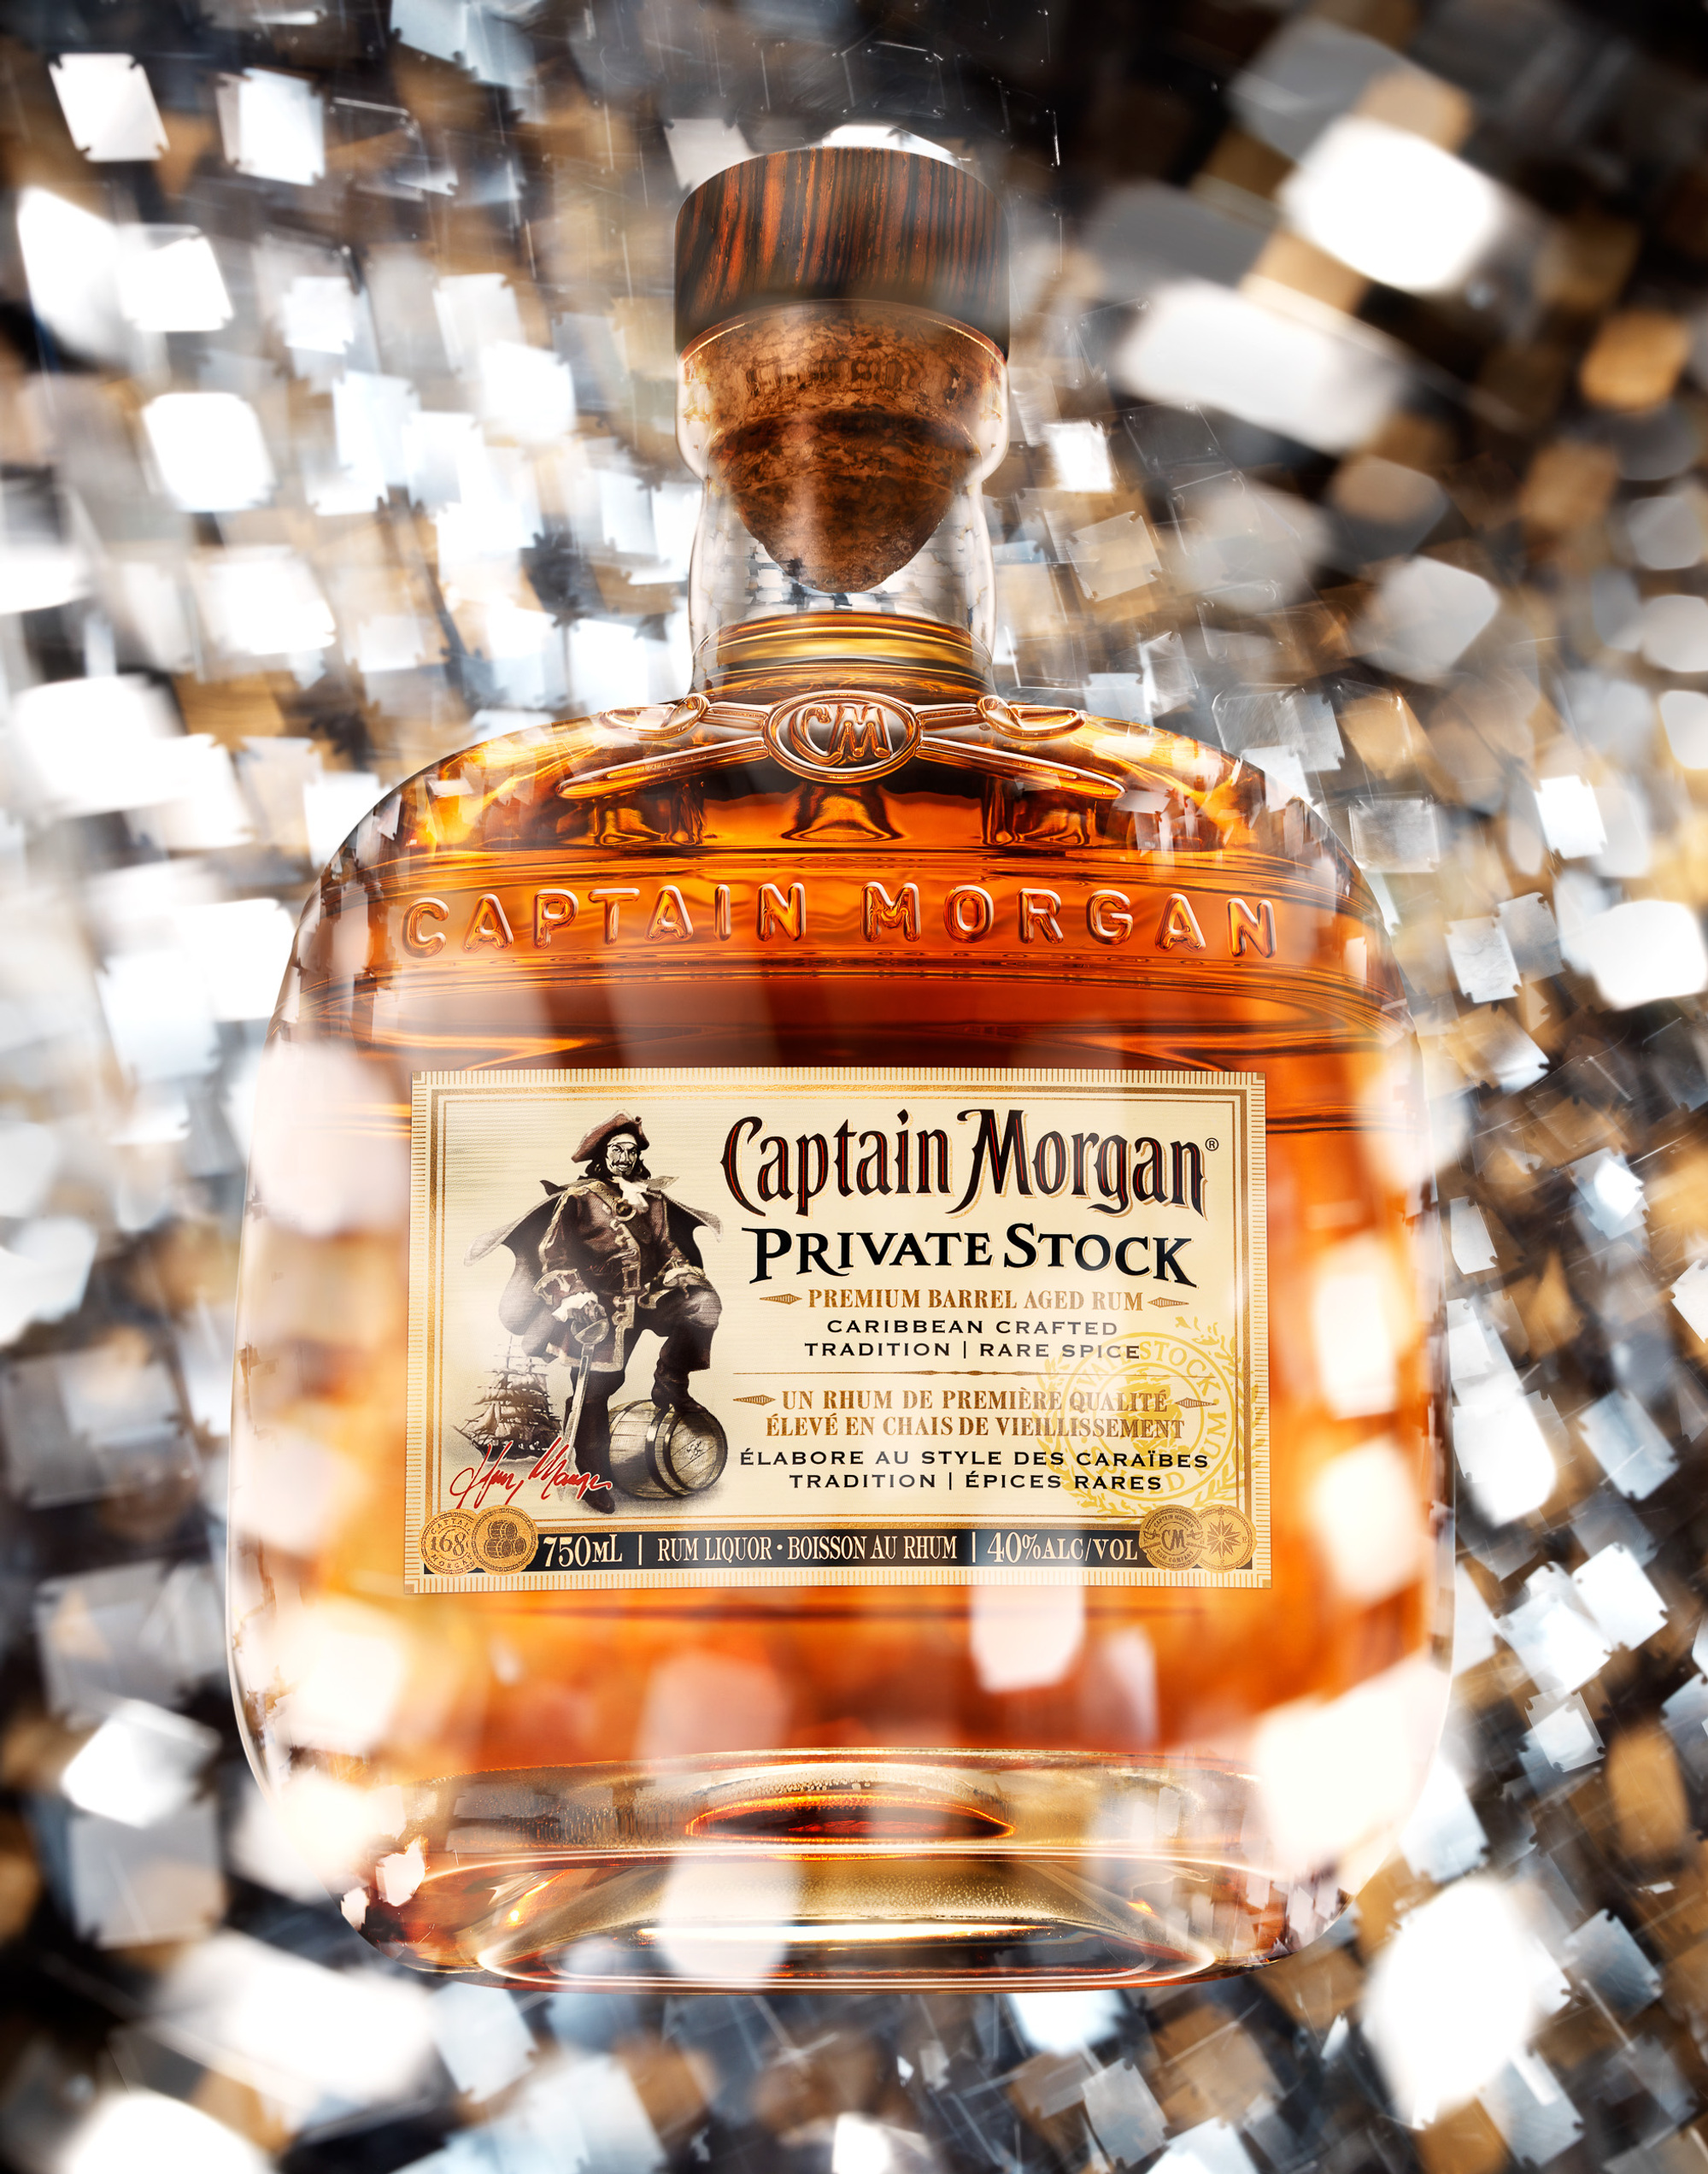 Captain Morgan Private stock reflections. Beverage bottle photography by Timothy Hogan Studio in Los Angeles